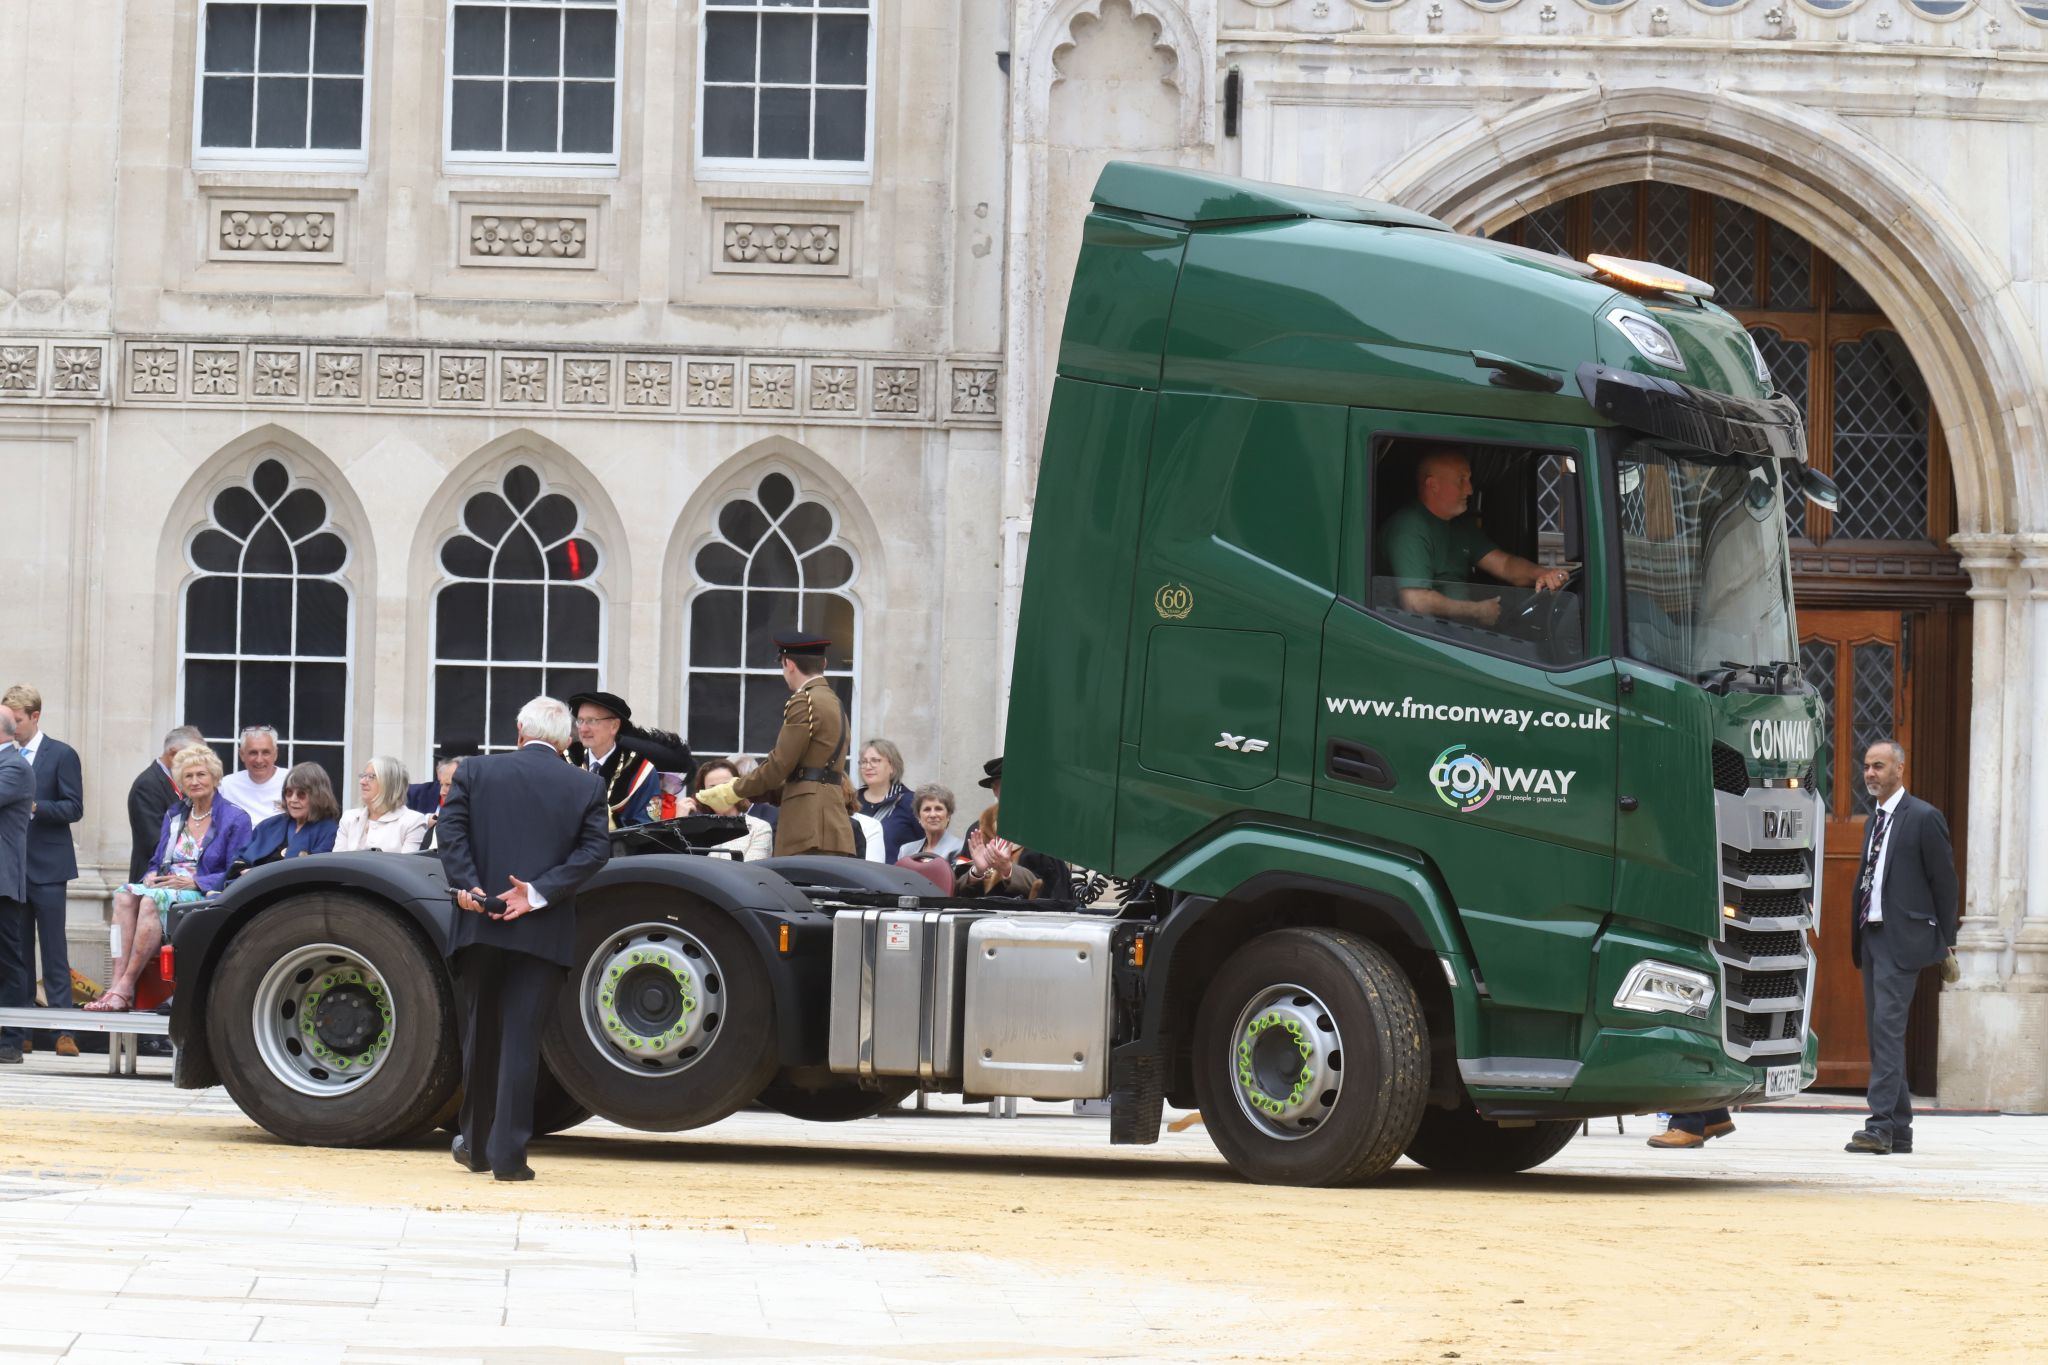 DAF XF 2023 SK23FFU. City of London 2023 Cart Marking in Guildhall Yard on 22-Jul-2023. Hosted by the Worshipful Company of Carmen with the Lord Mayor of the City of London in attendance. Wooden plates on the vehicles are branded with hot irons to allow them to ply for trade in the Square Mile. Another of the City Livery Company's annual ceremonies.